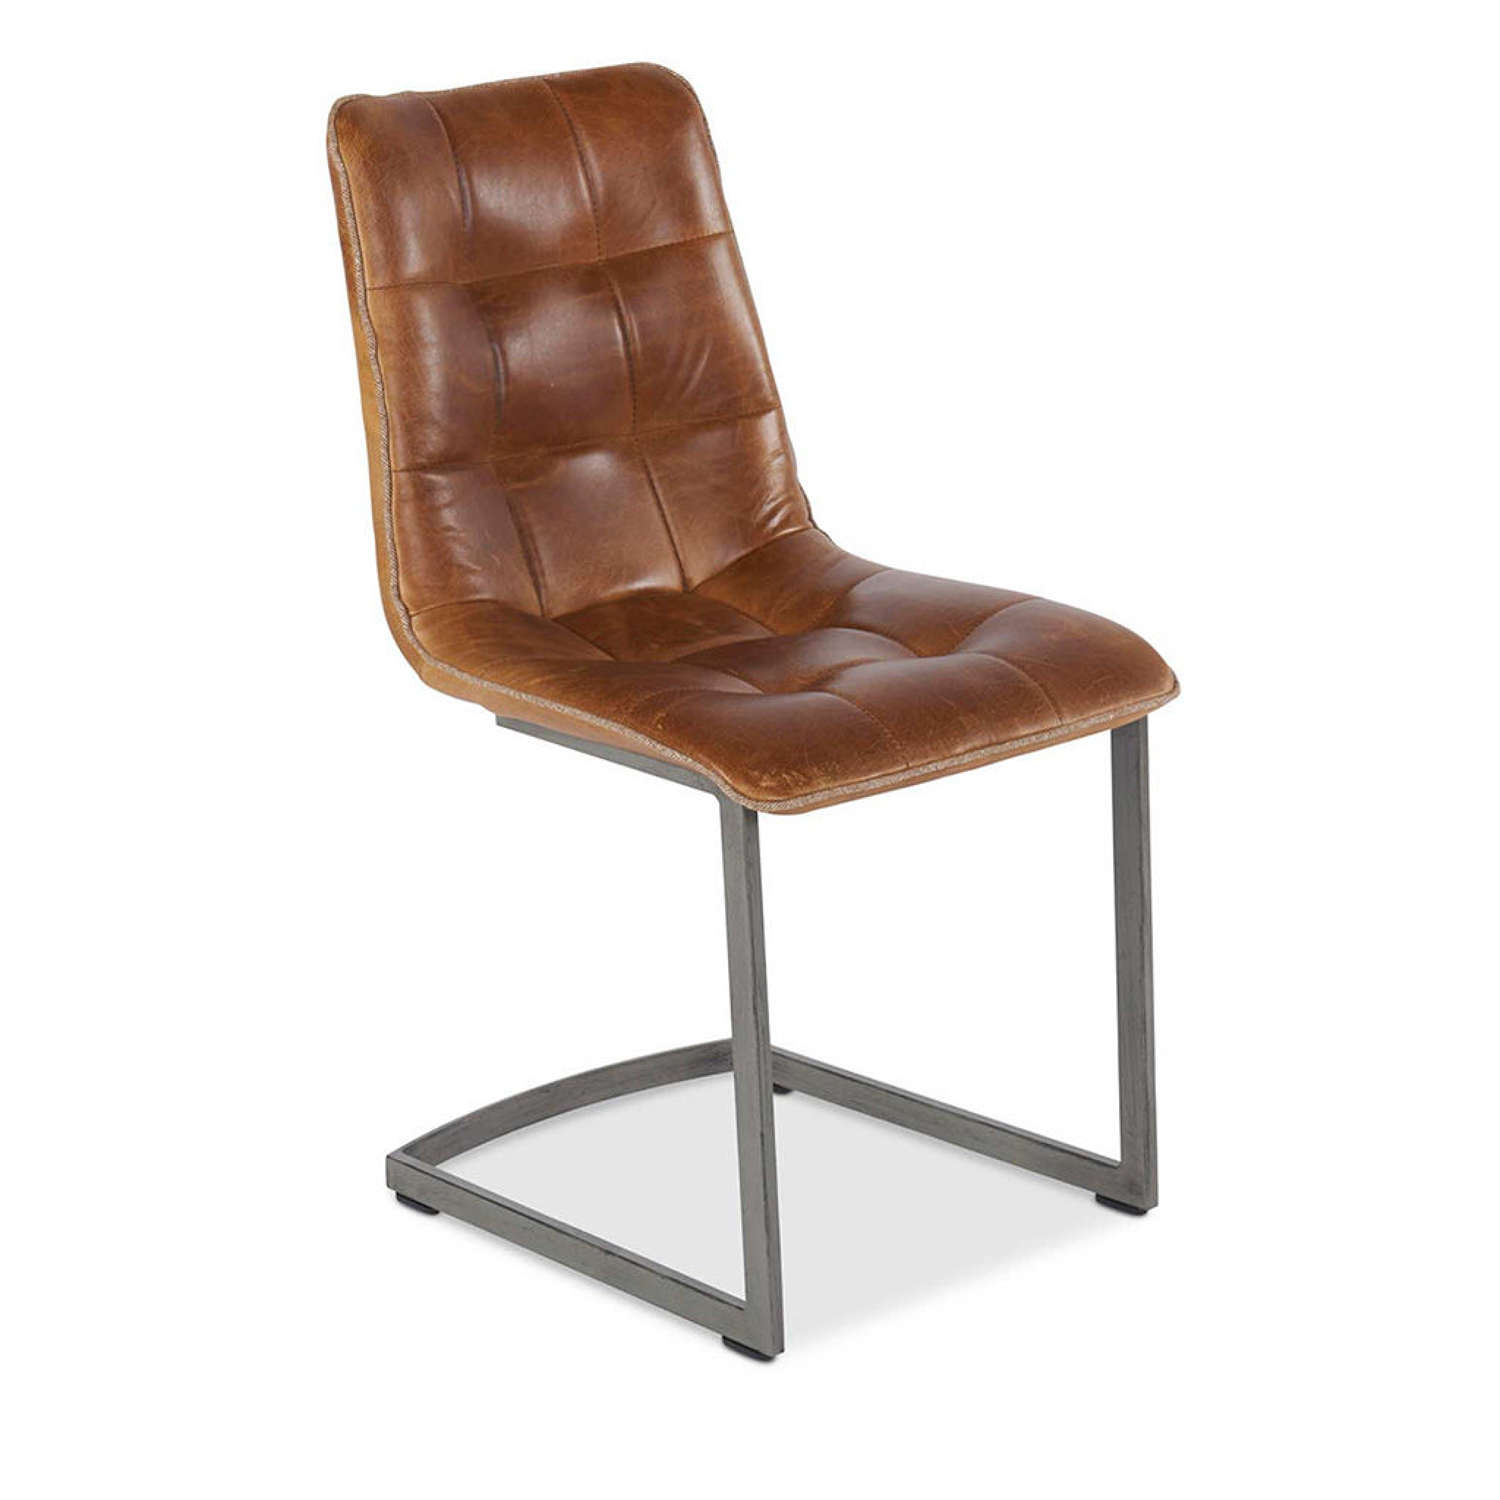 Dolomite Cerato Brown leather Dining Chair and piping